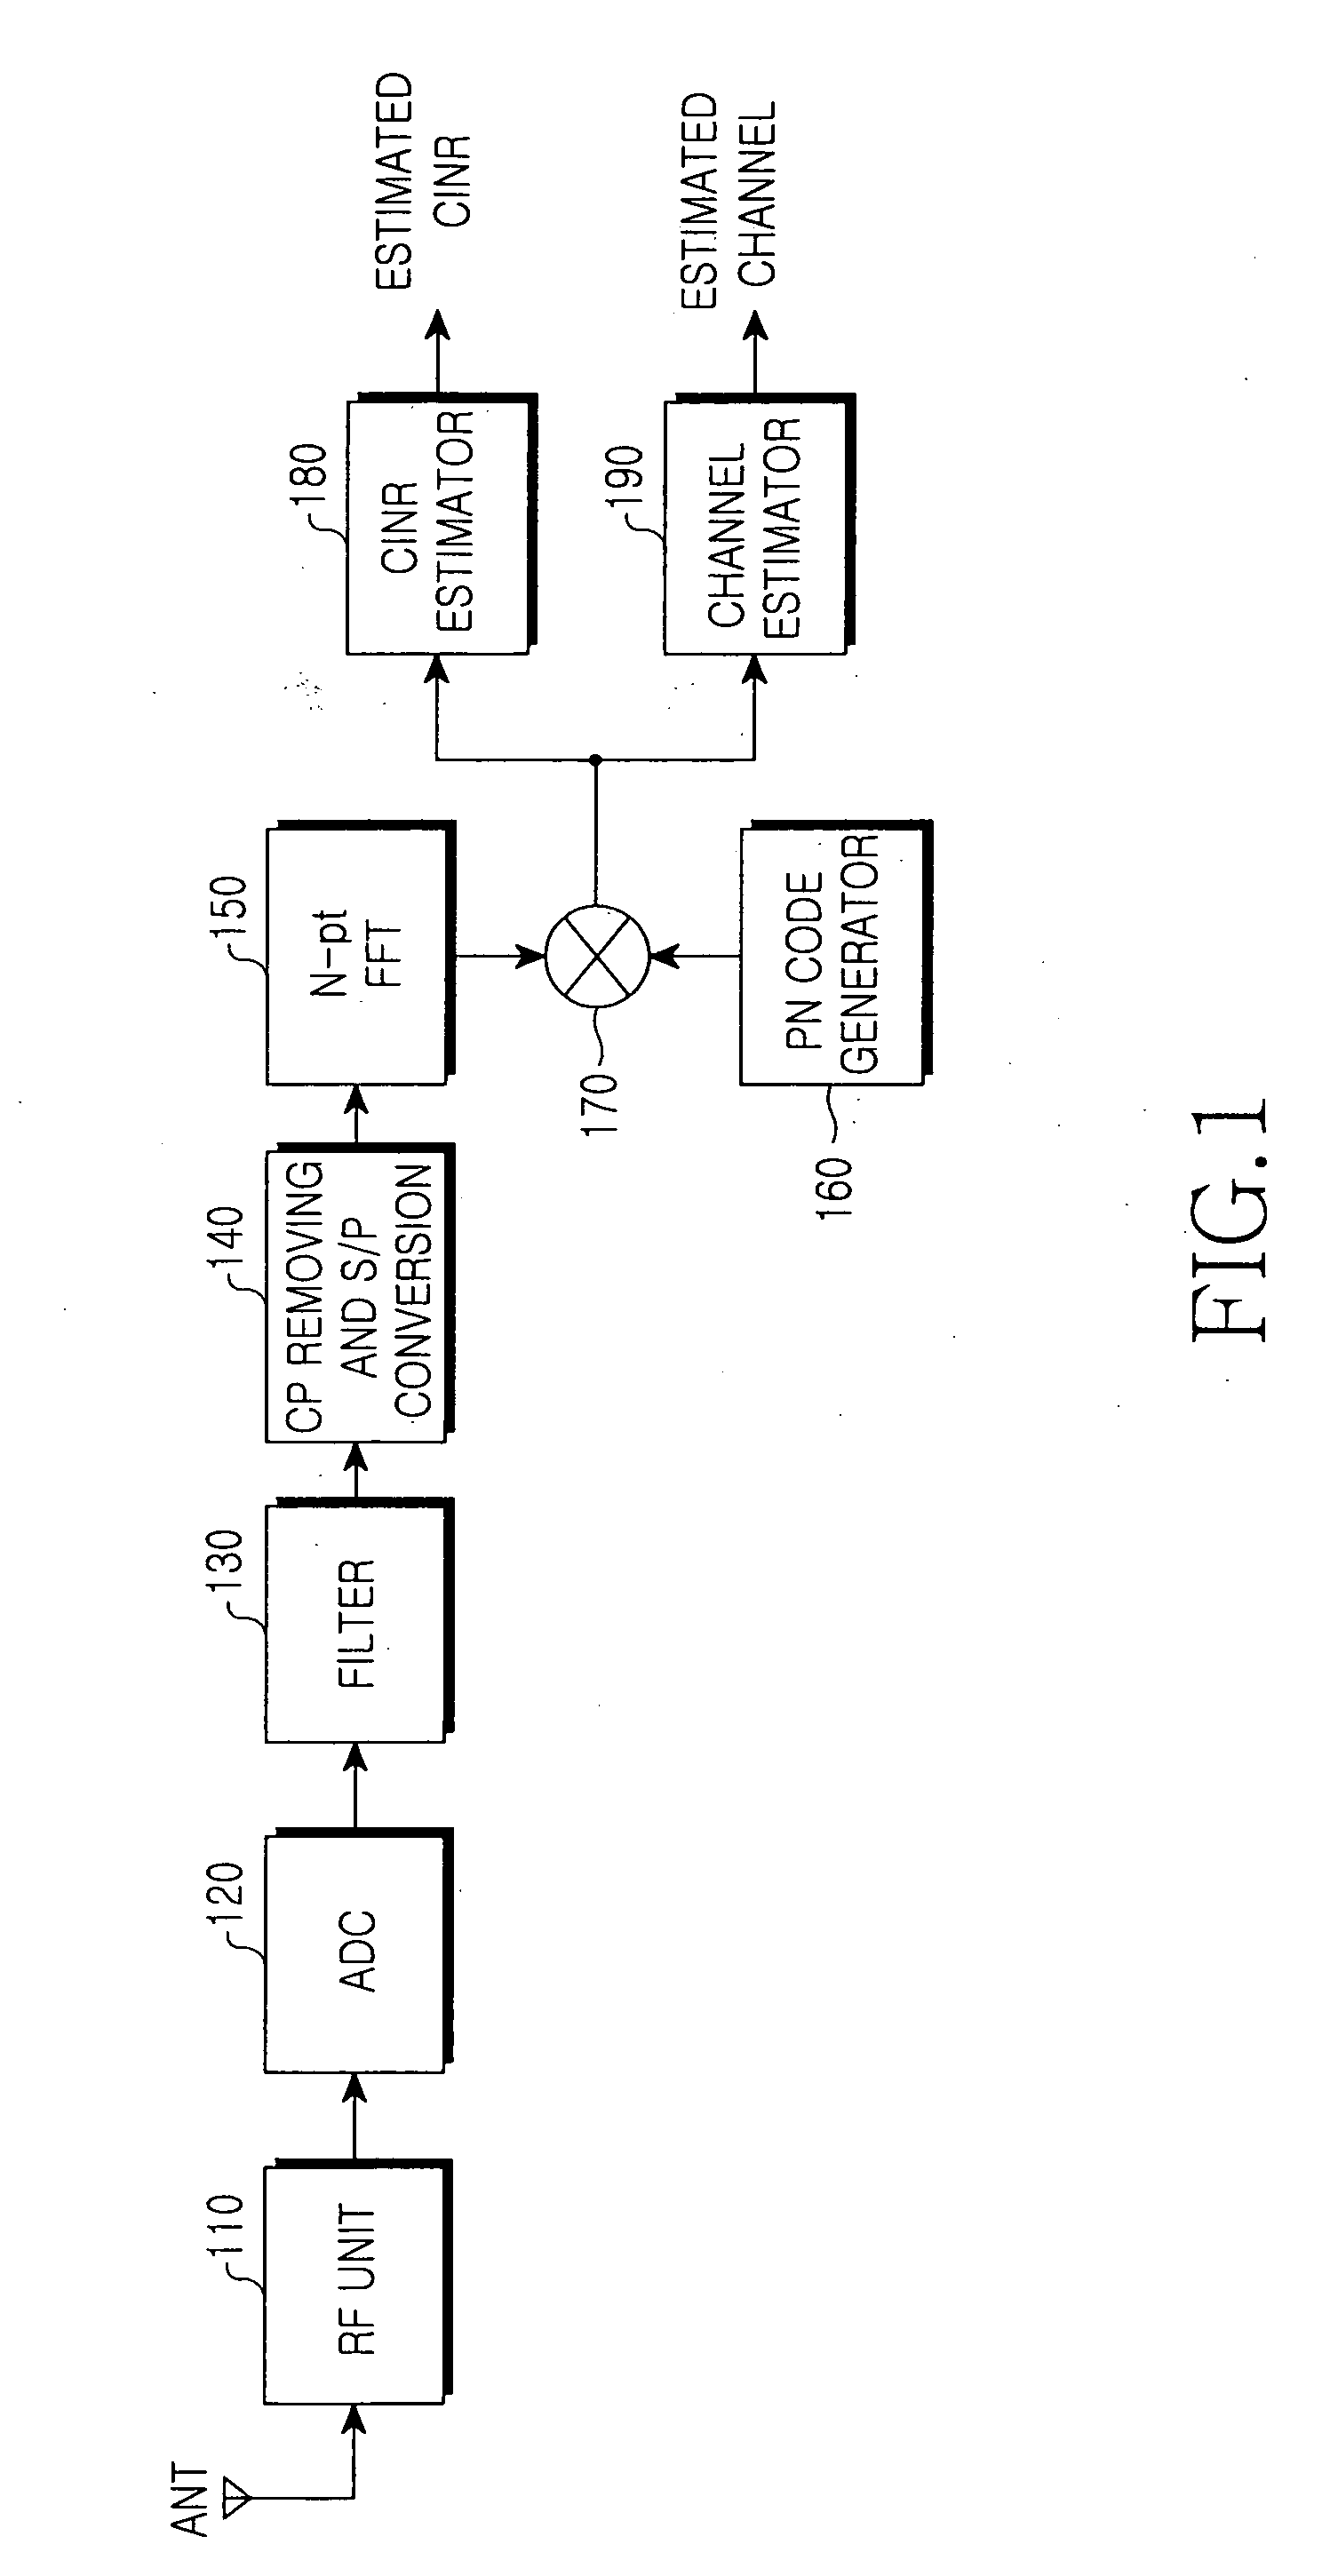 Apparatus and method for estimating CINR in an OFDM communication system